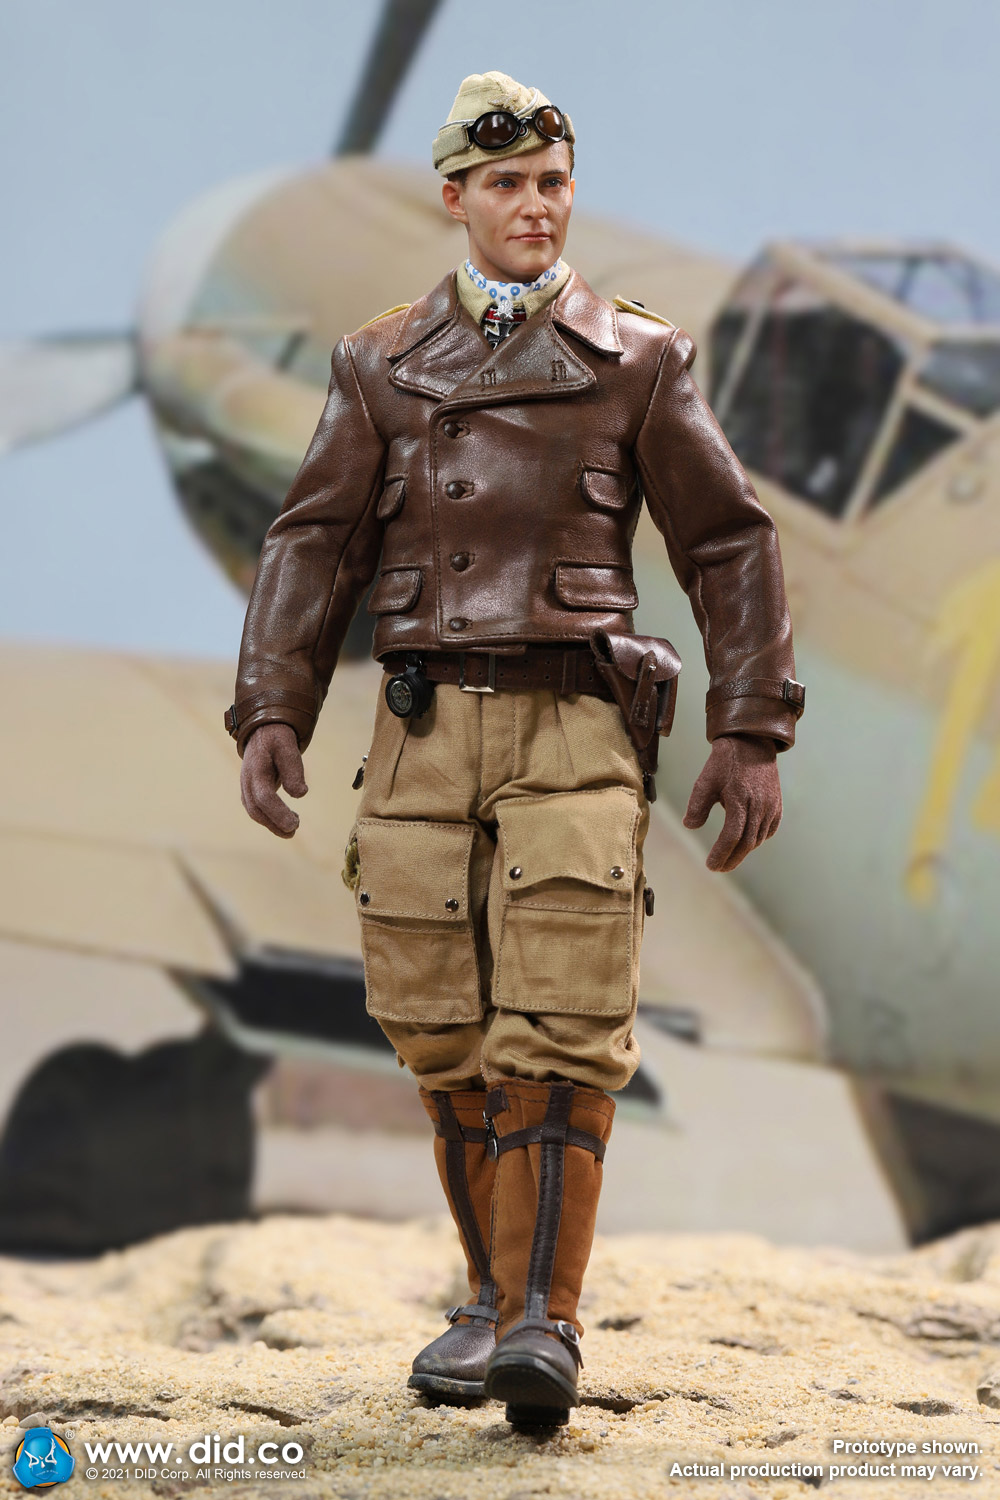 did - NEW PRODUCT: D80154 WWII German Luftwaffe Flying Ace “Star Of Africa” – Hans-Joachim Marseille & E60060  Diorama Of “Star Of Africa” 13345